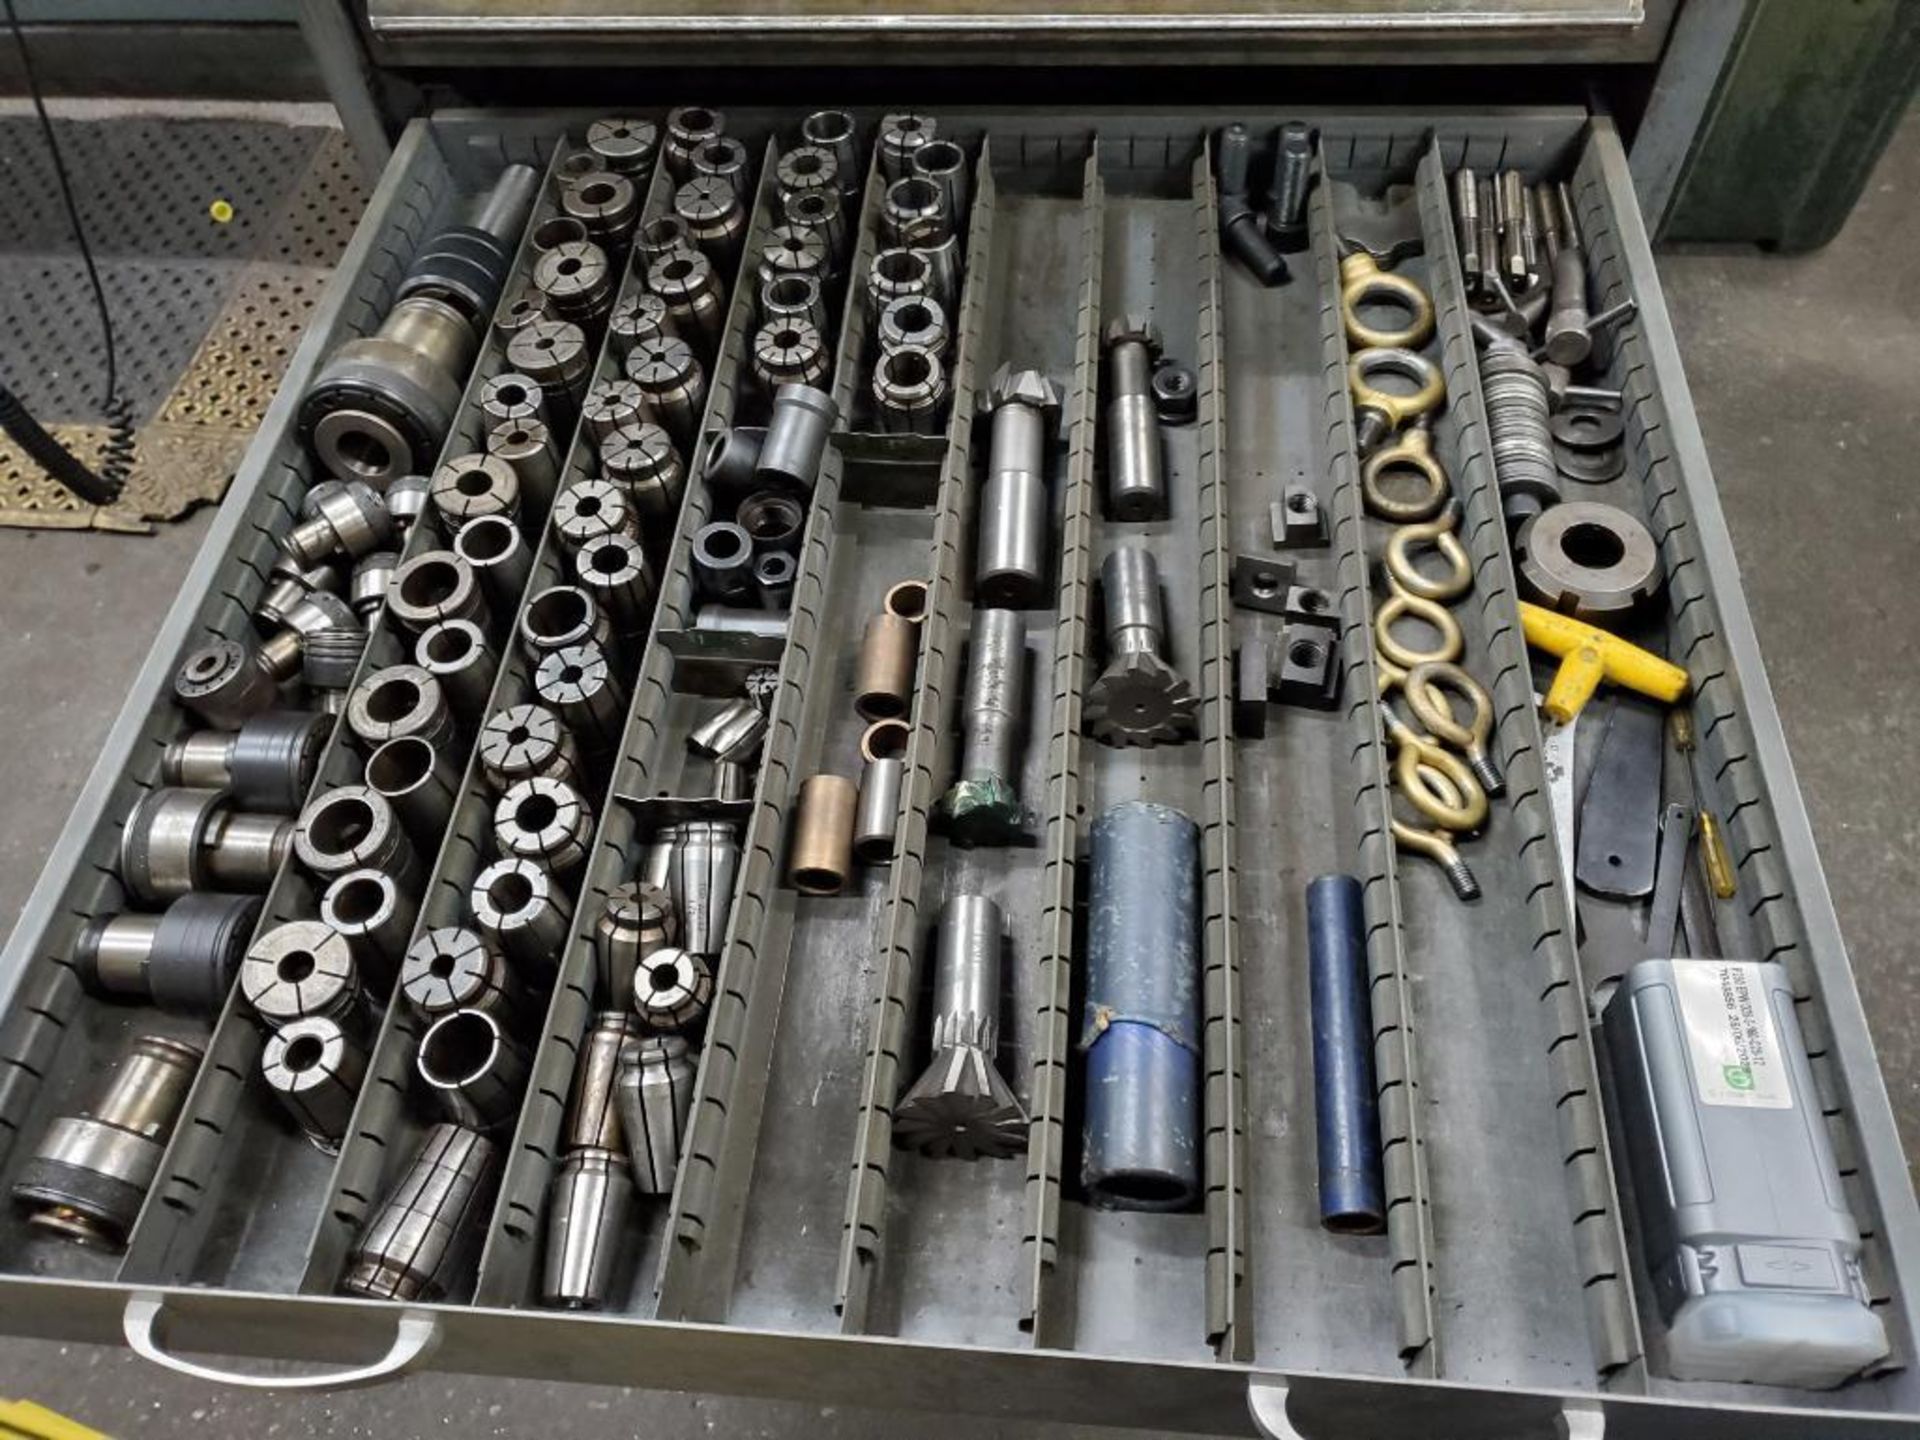 9-Drawer Modular Tool Cabinet Full Of Tooling & Accessories; Drills, Flutes, Drills, End Mills, Ream - Image 10 of 13